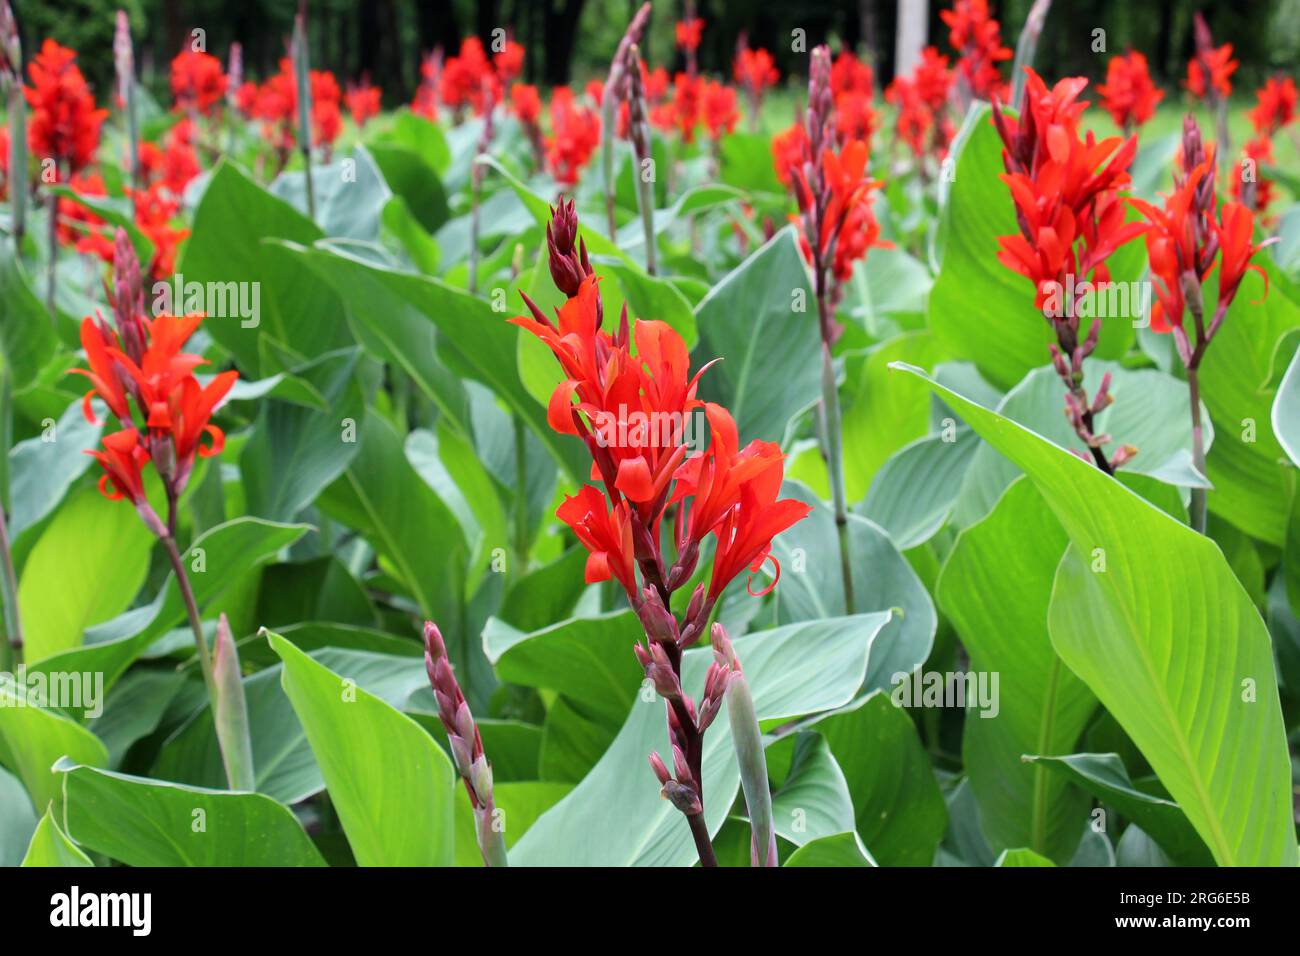 In summer, red cannas bloom in the flowerbed Stock Photo